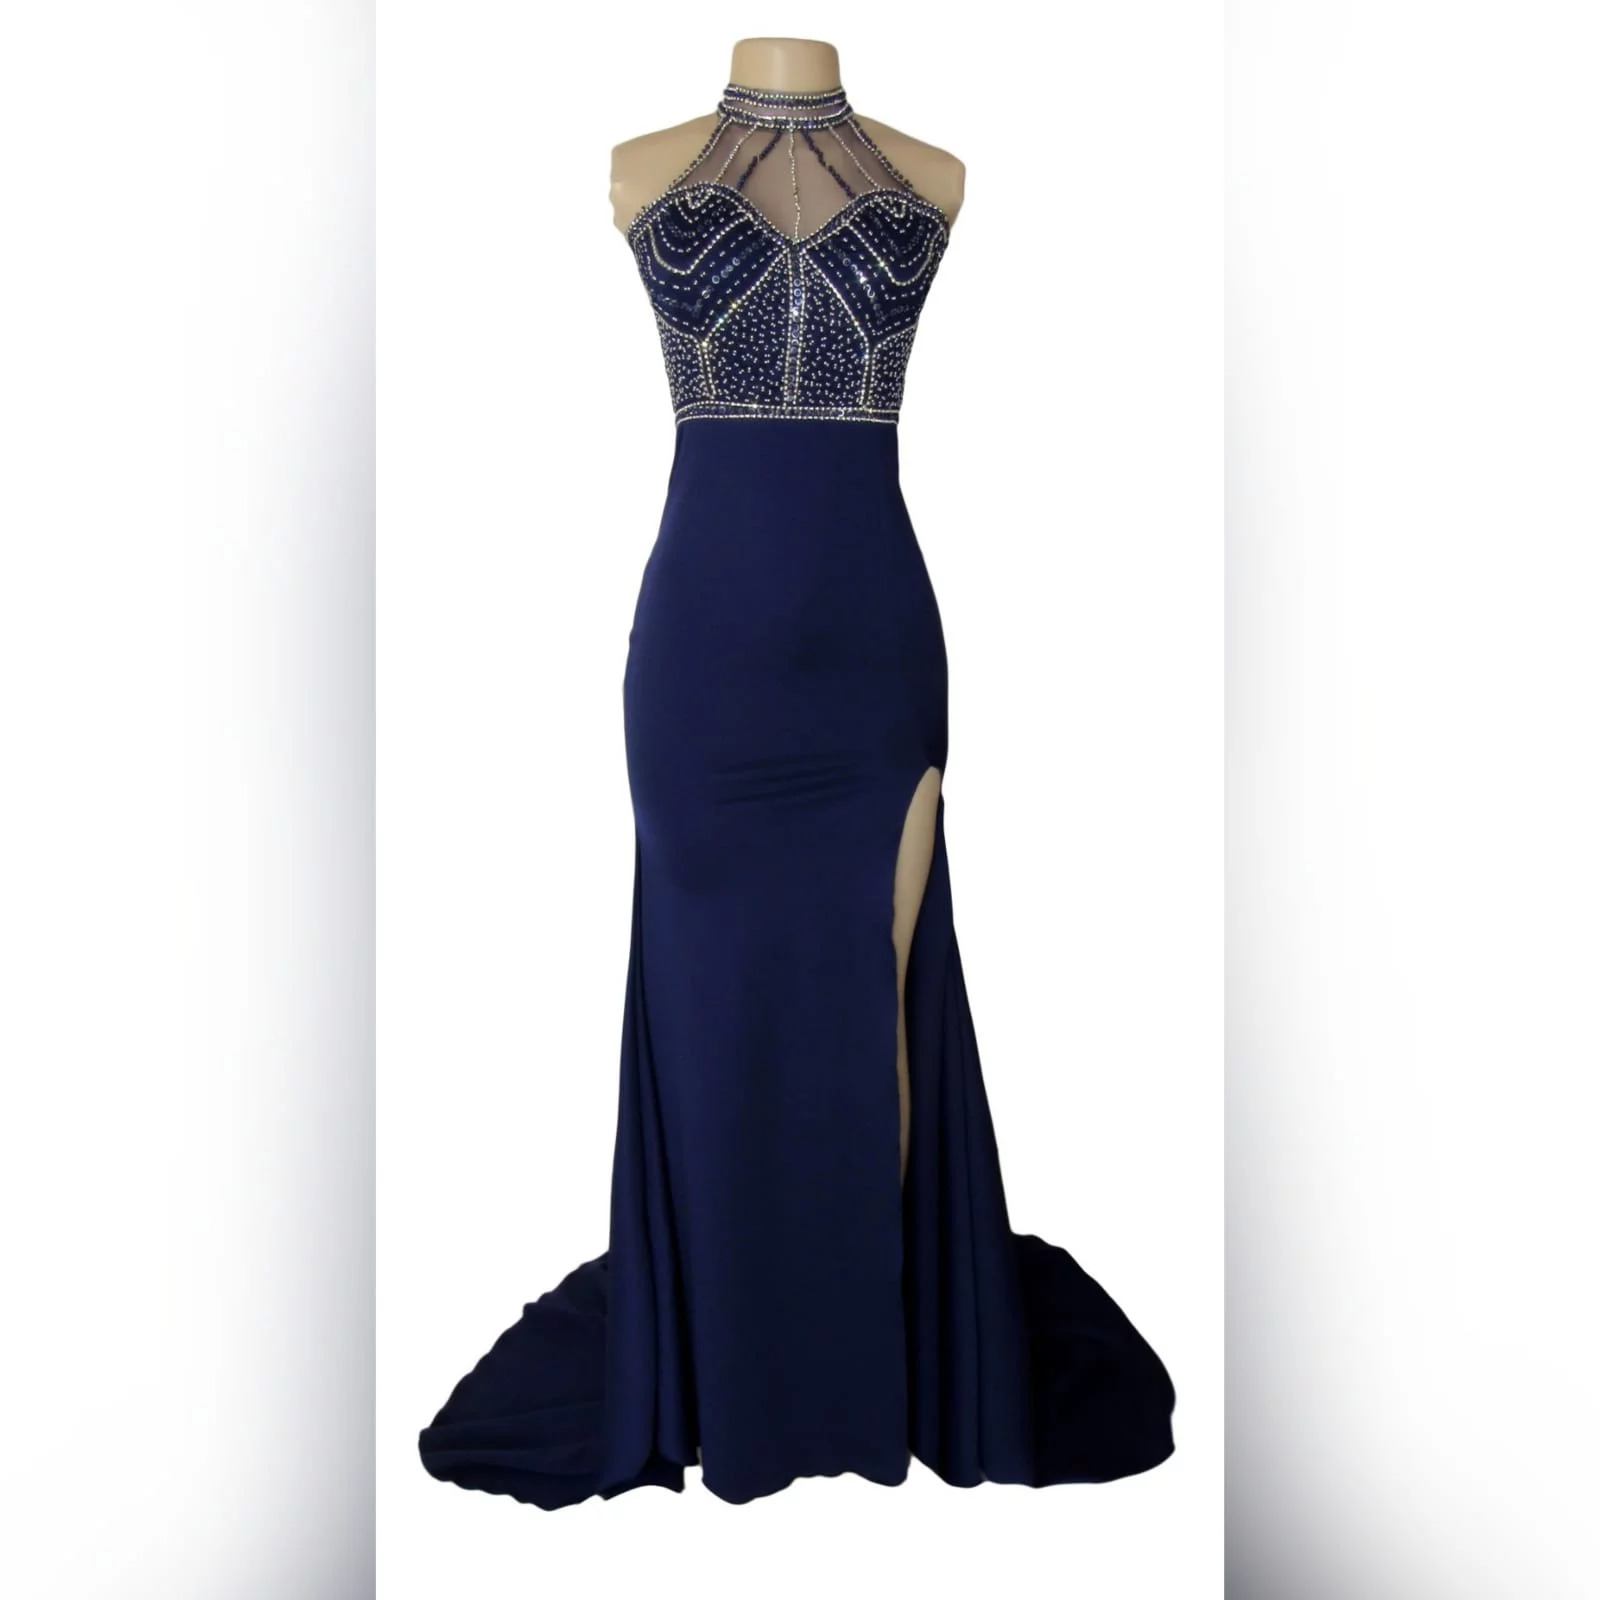 Navy blue silver beaded prom dress 4 navy blue silver beaded prom dress with an illusion neckline and a choker effect. Backless design detailed with beaded straps. Fitted bottom with a slit and a train.